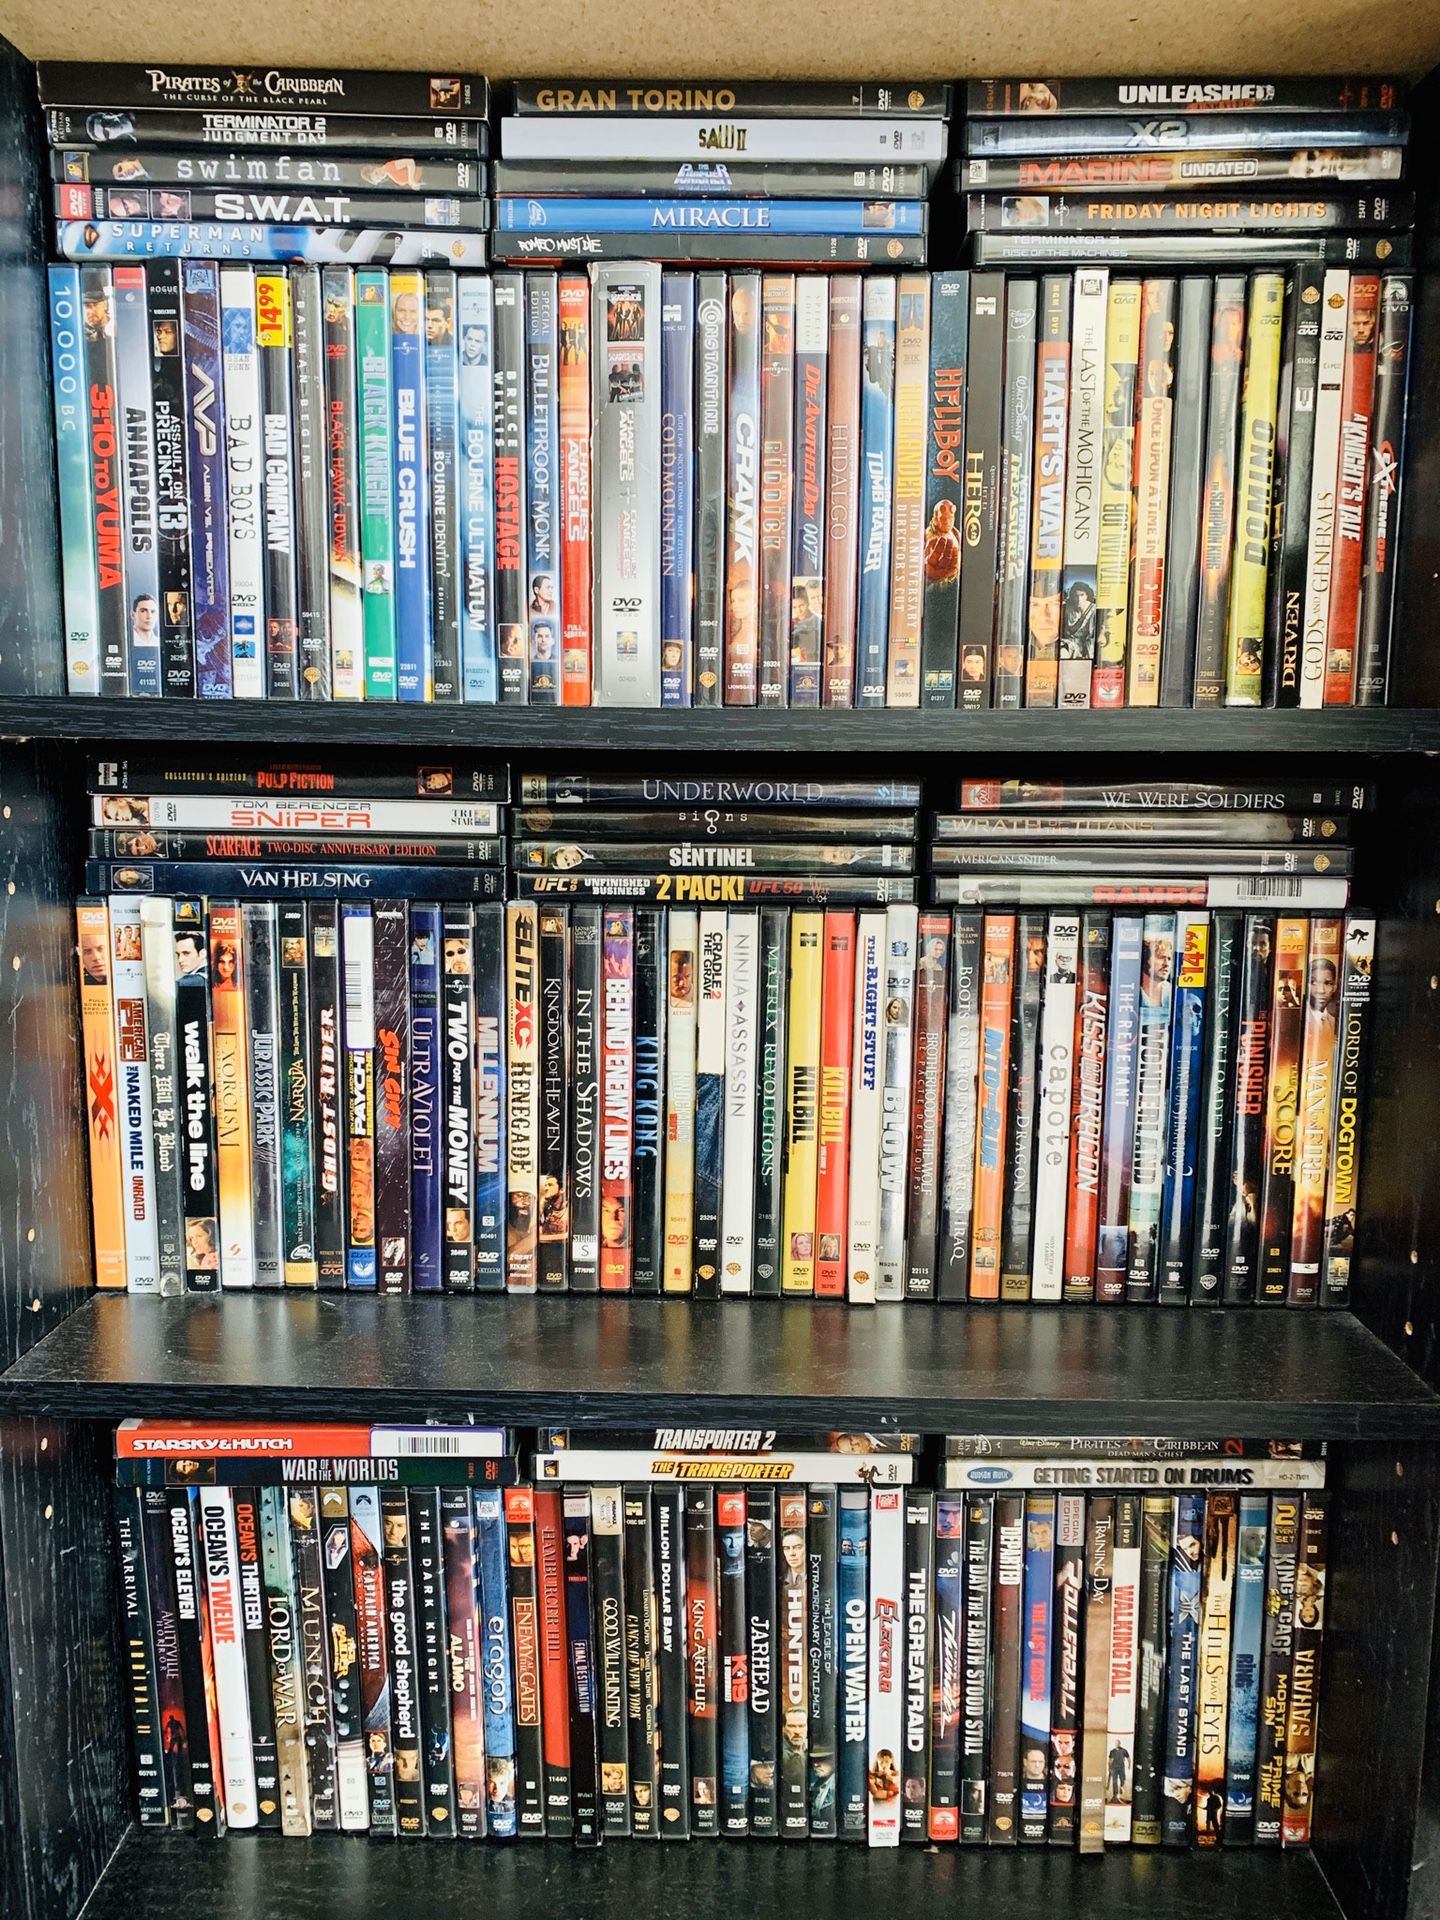 LOTS & LOTS OF DVD / DVDS / DISC / DISCS / CD / CDS / MOVIES / SHOWS